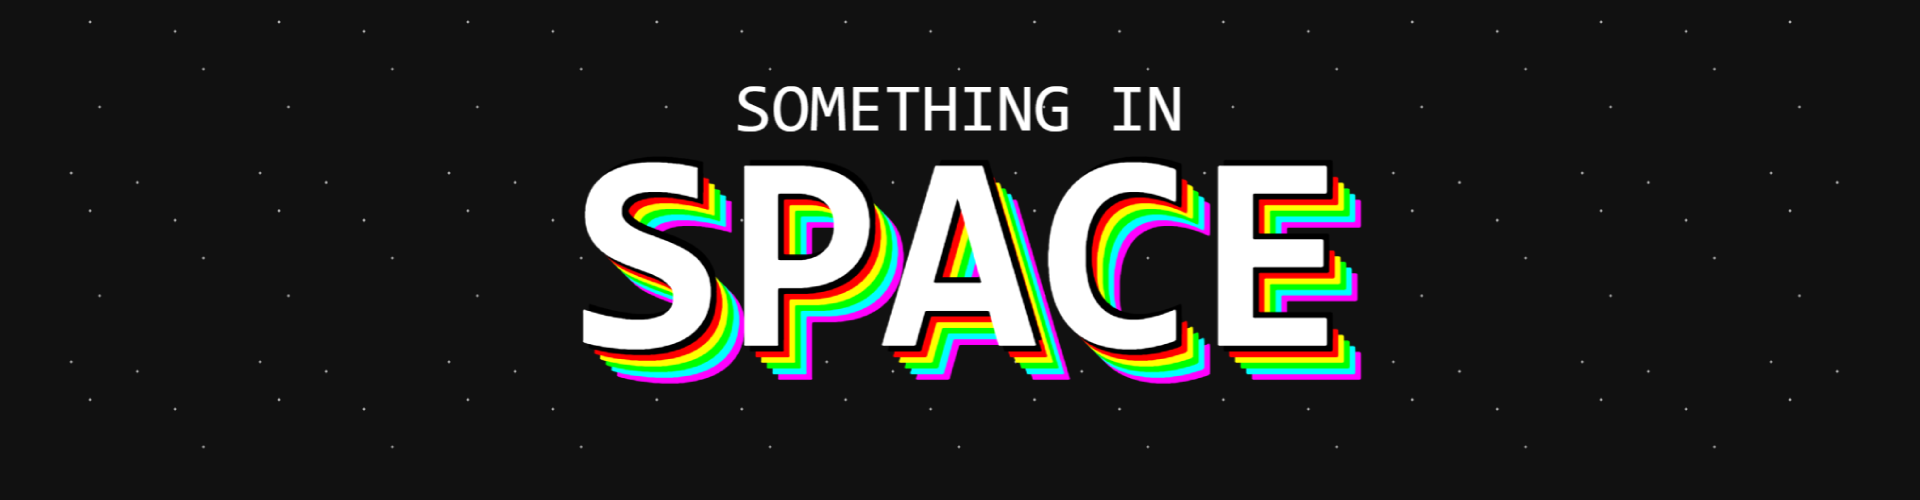 Something In Space